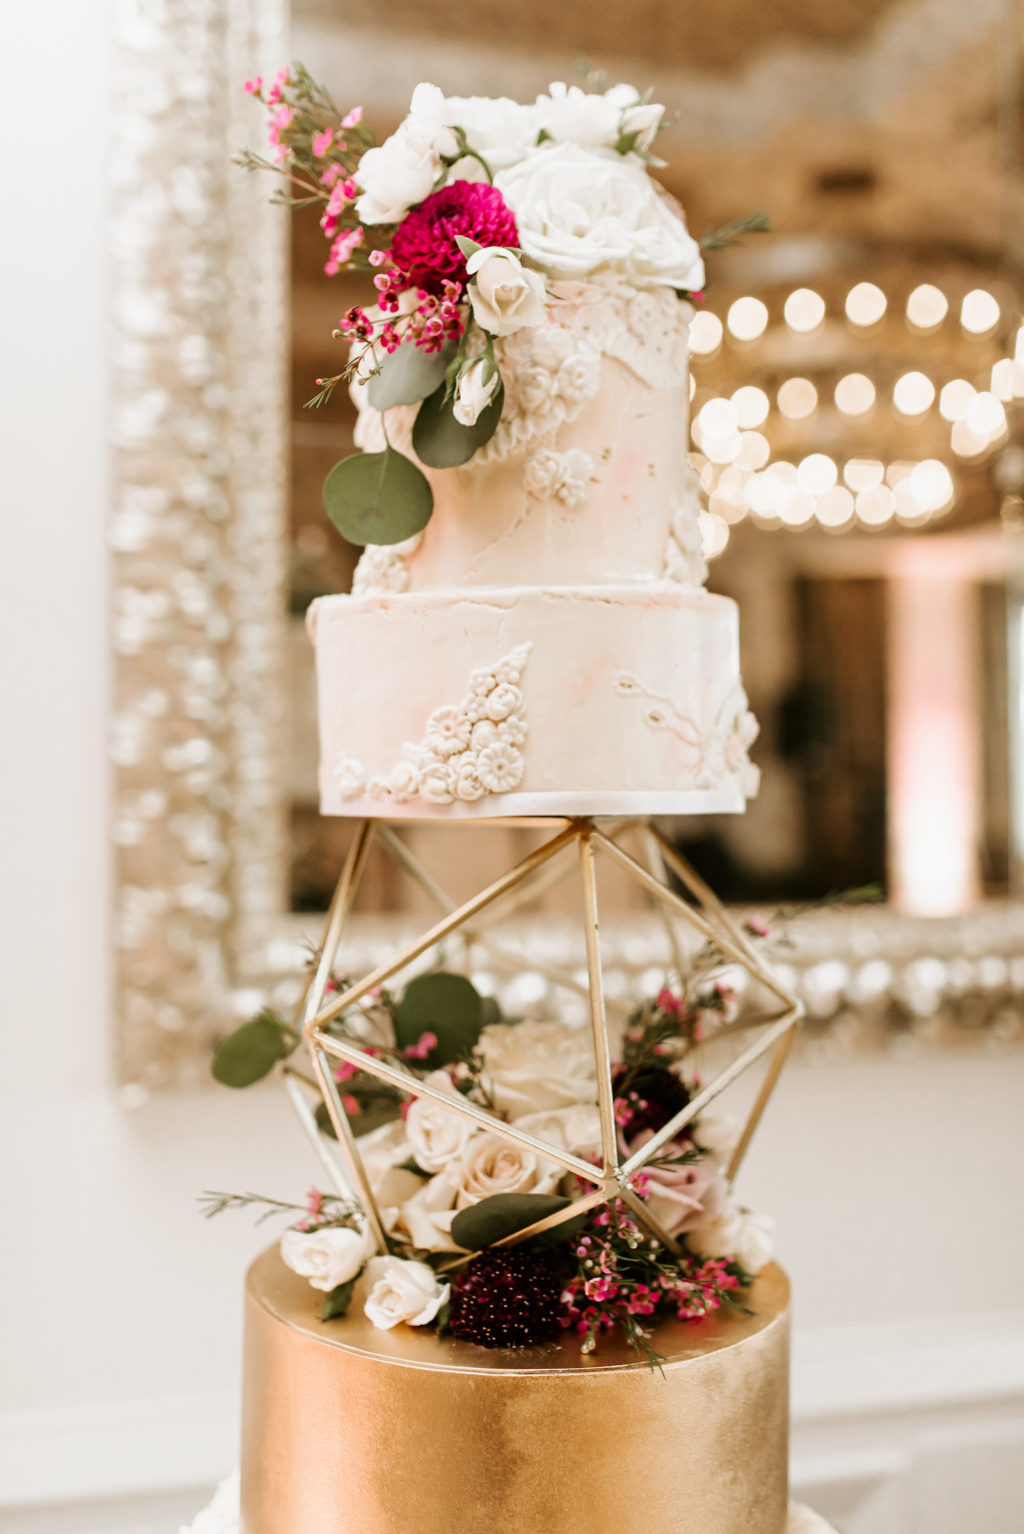 Four Tier Wedding Cake with Gold Geometric Orb Layer by Tampa Cake Baker The Artistic Whisk | Piped Lace Buttercream Fondant Victorian Fancy Wedding Cake with White and Red Fresh Flowers Roses and Greenery